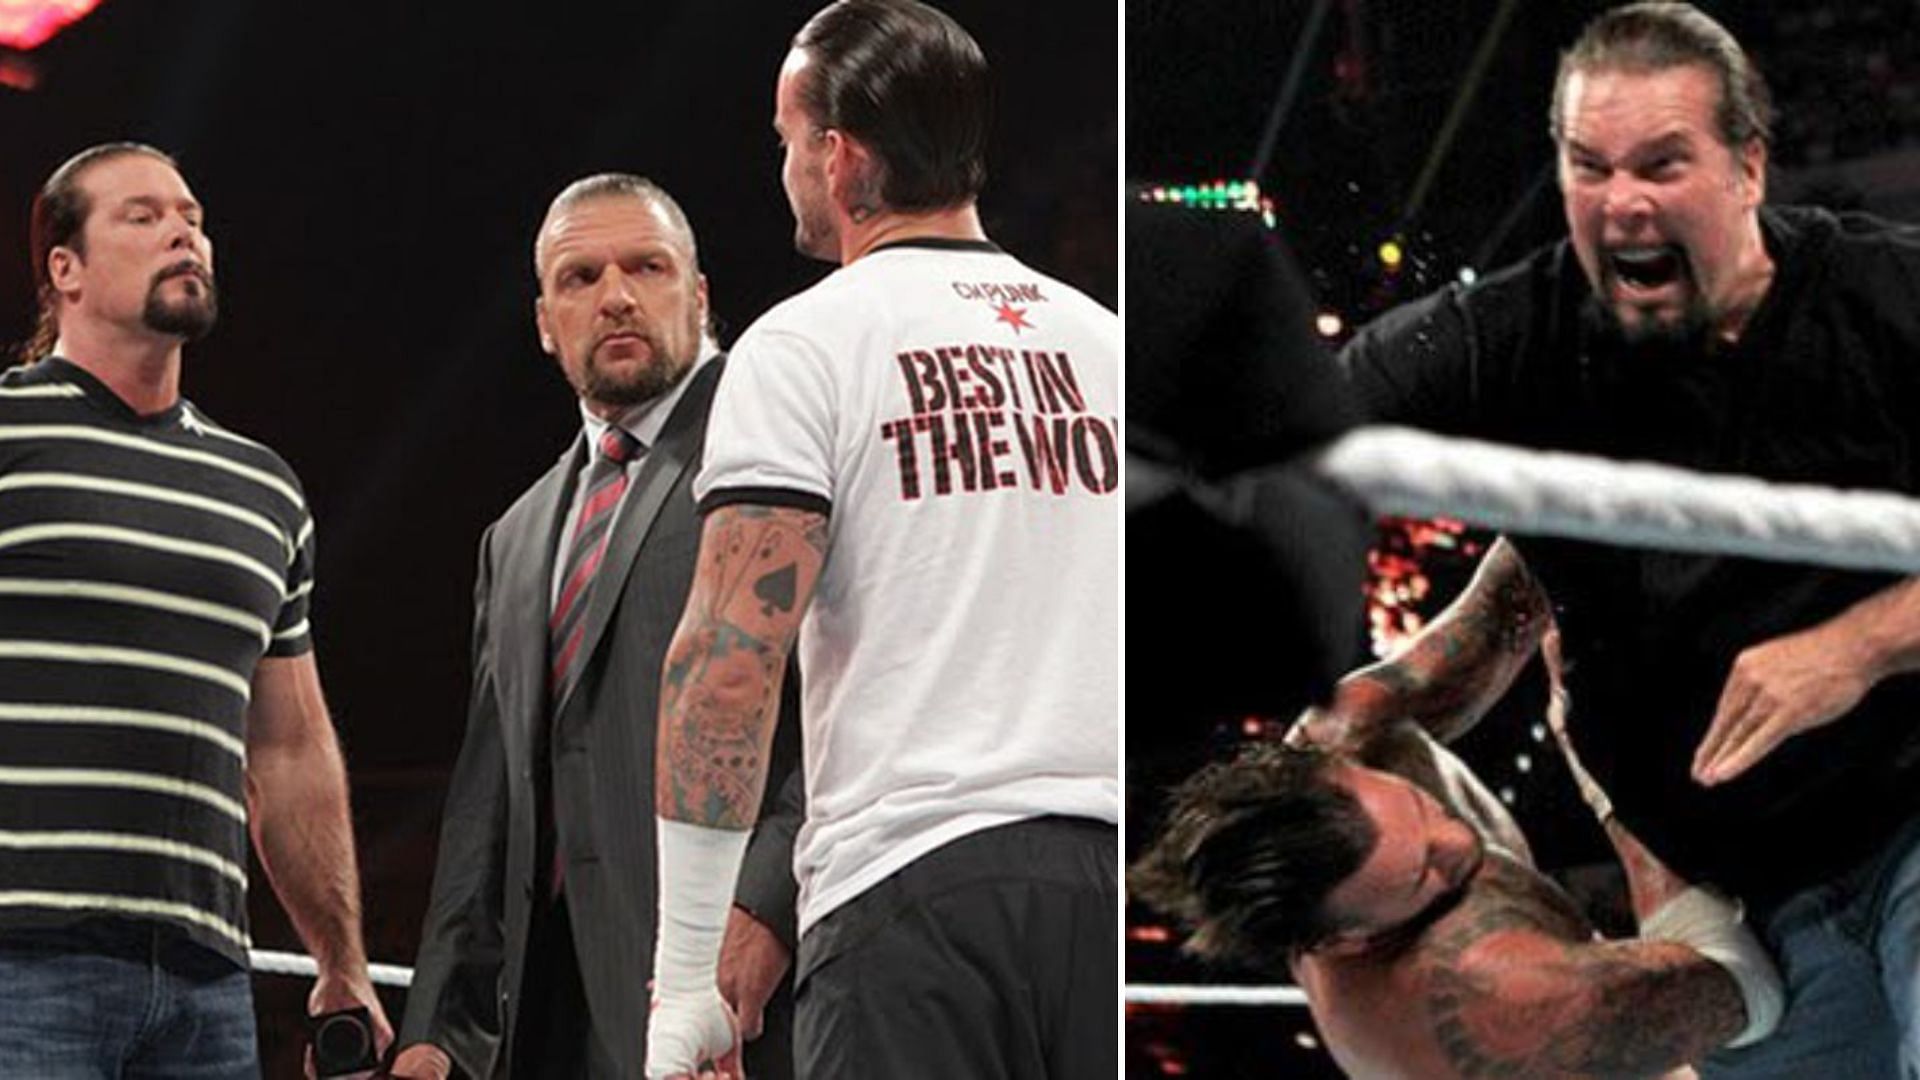 Kevin Nash cost CM Punk the WWE Championship at Summerslam 2011